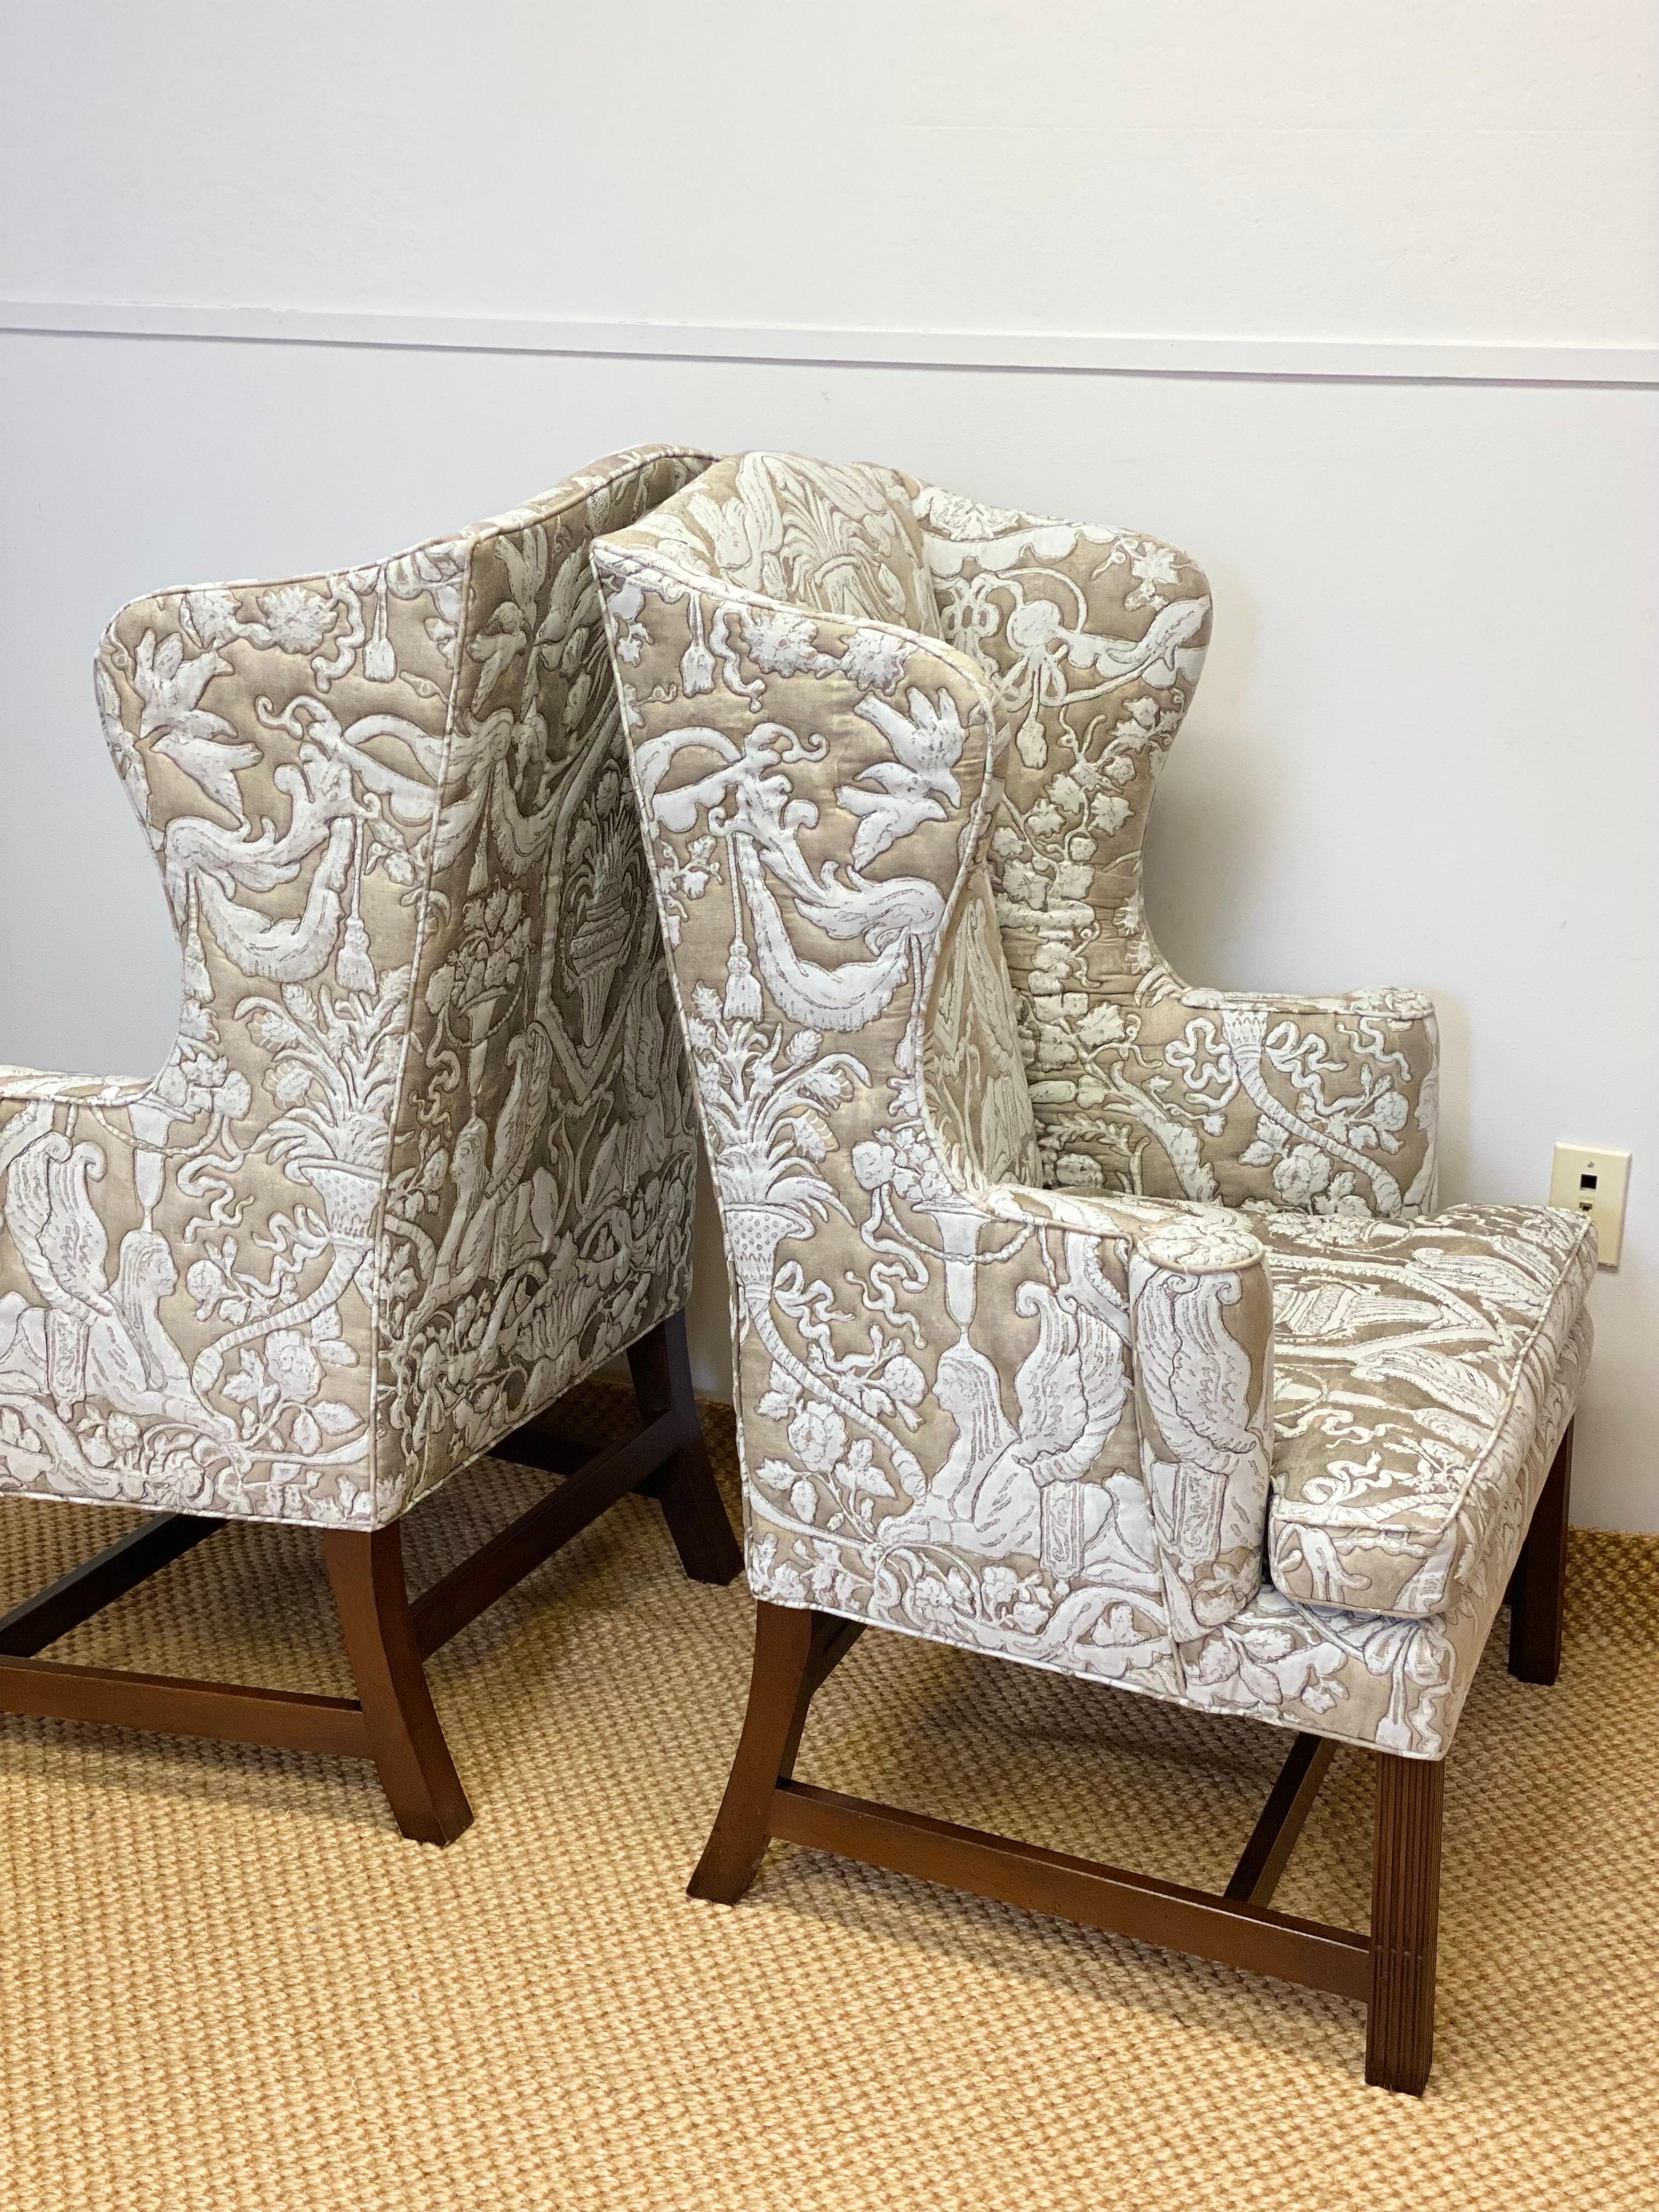 1960s Kittinger Cw12 Colonial Williamsburg Neoclassical Wingback Chairs – a Pair In Good Condition For Sale In Farmington Hills, MI